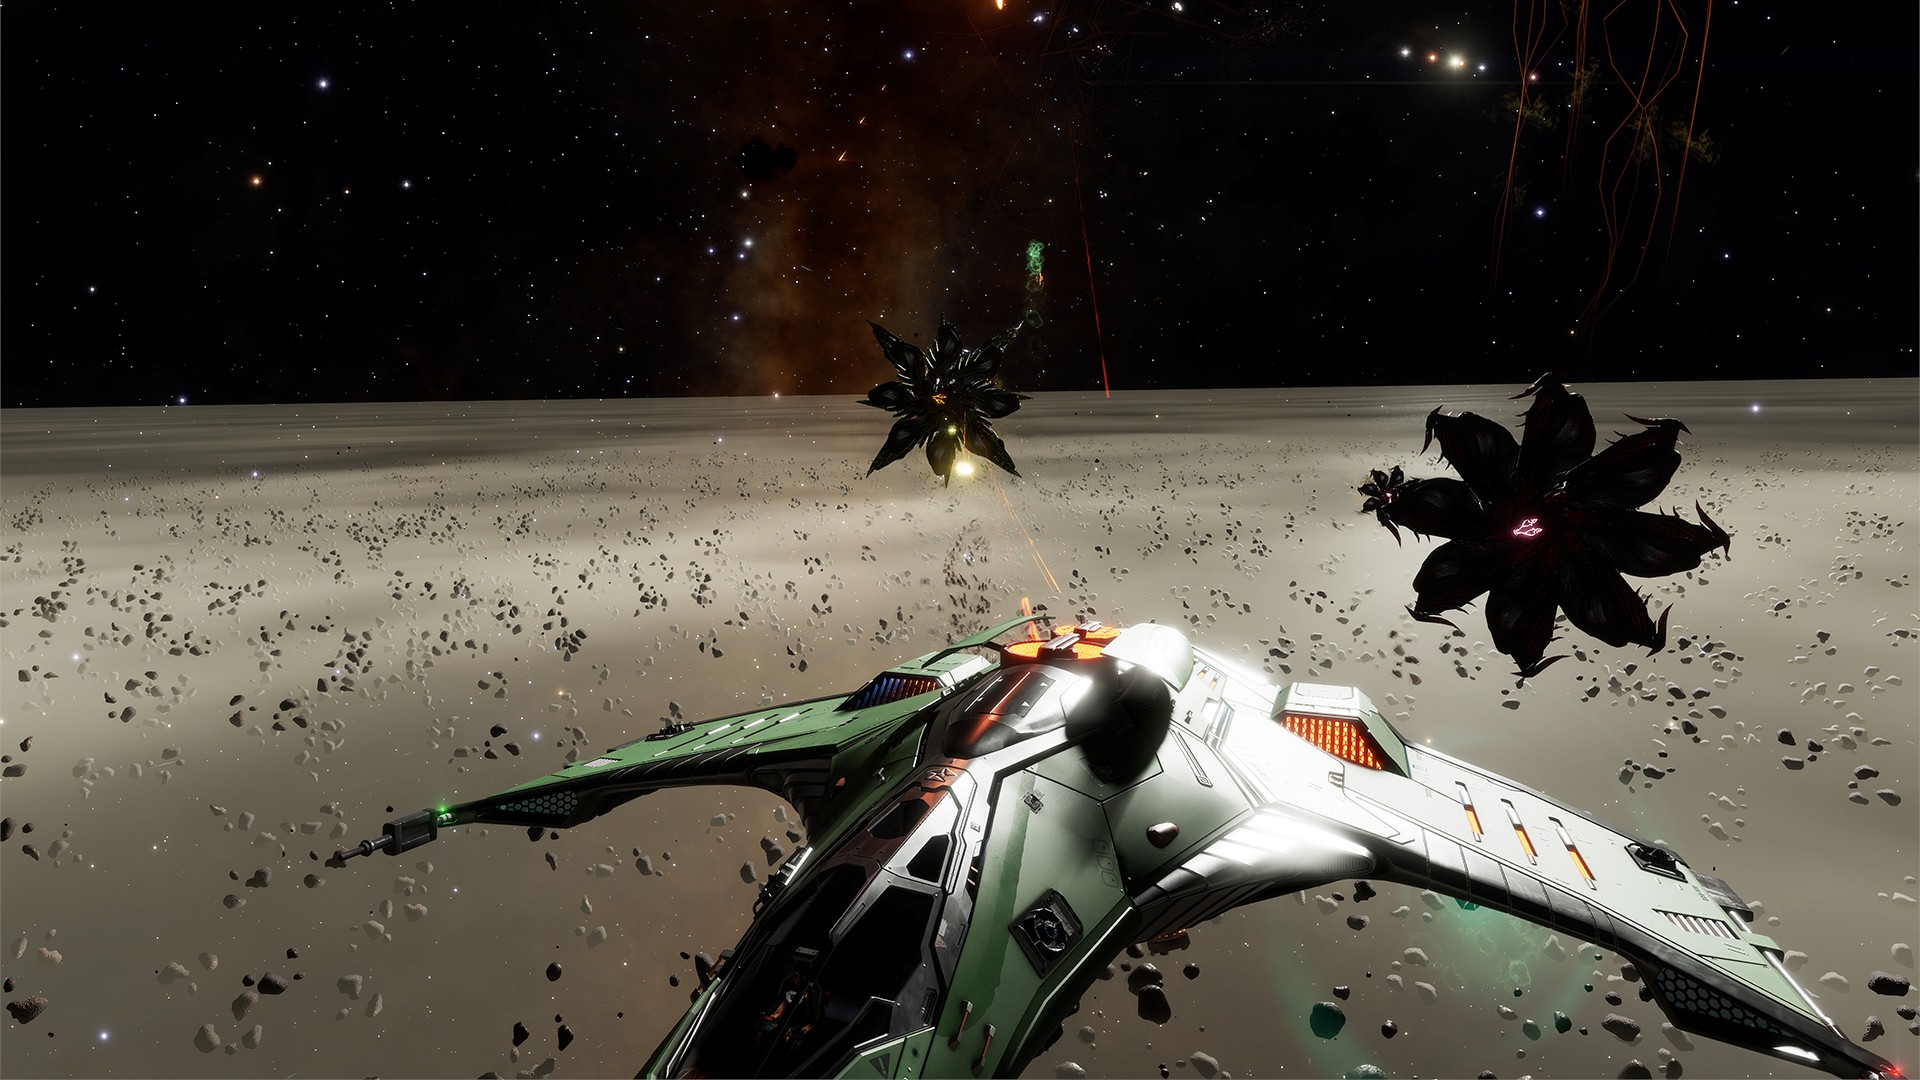 Elite Dangerous' Final Azimuth Story Arc and New Aftermath Phase